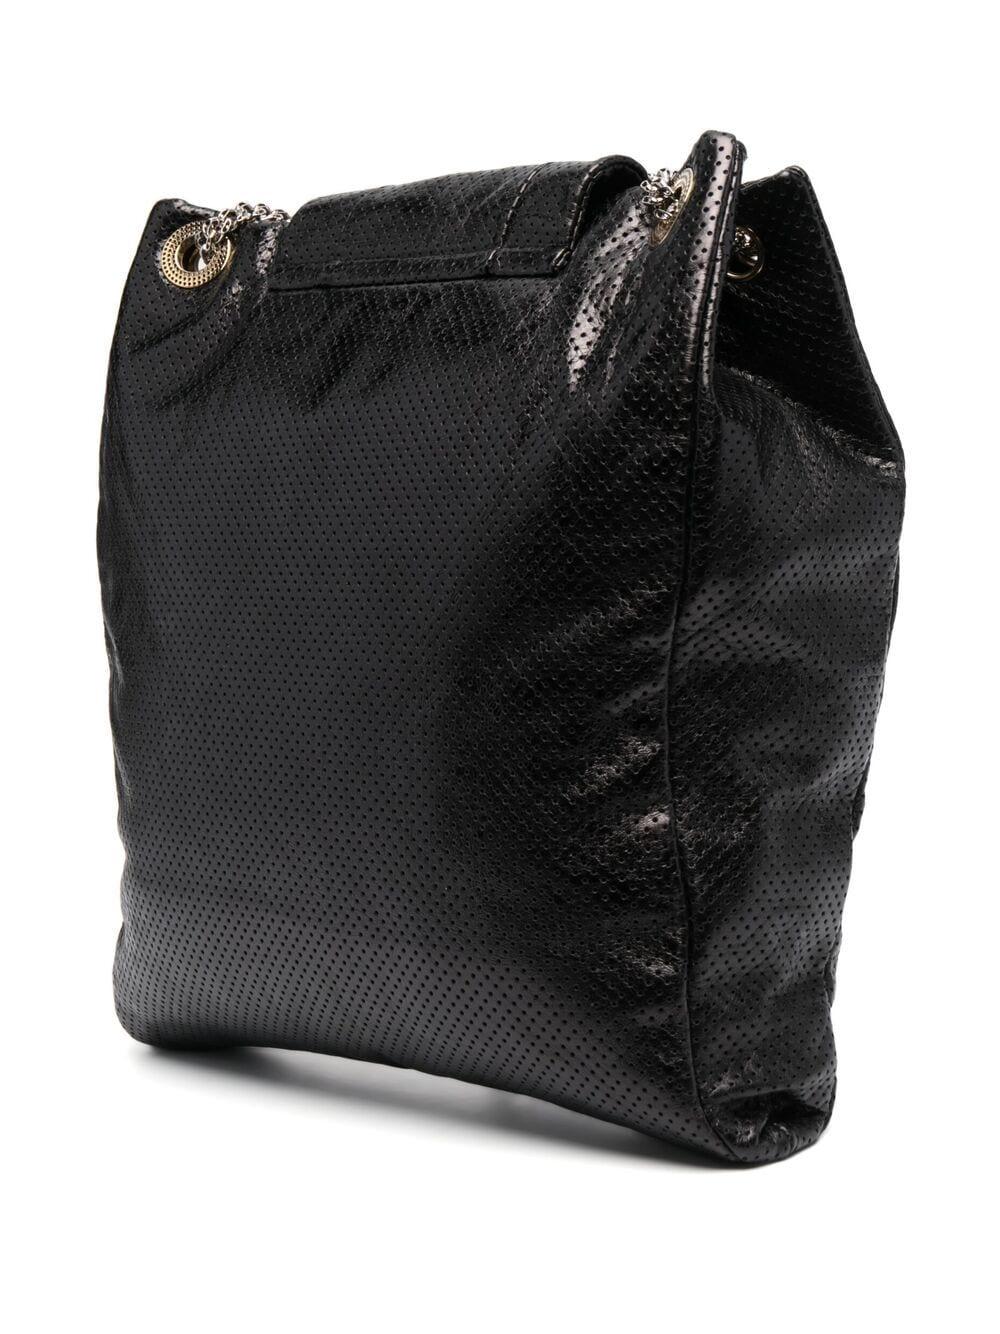 2008 Chanel Black Perforated Leather Shoulder Tote Bag In Excellent Condition In Paris, FR